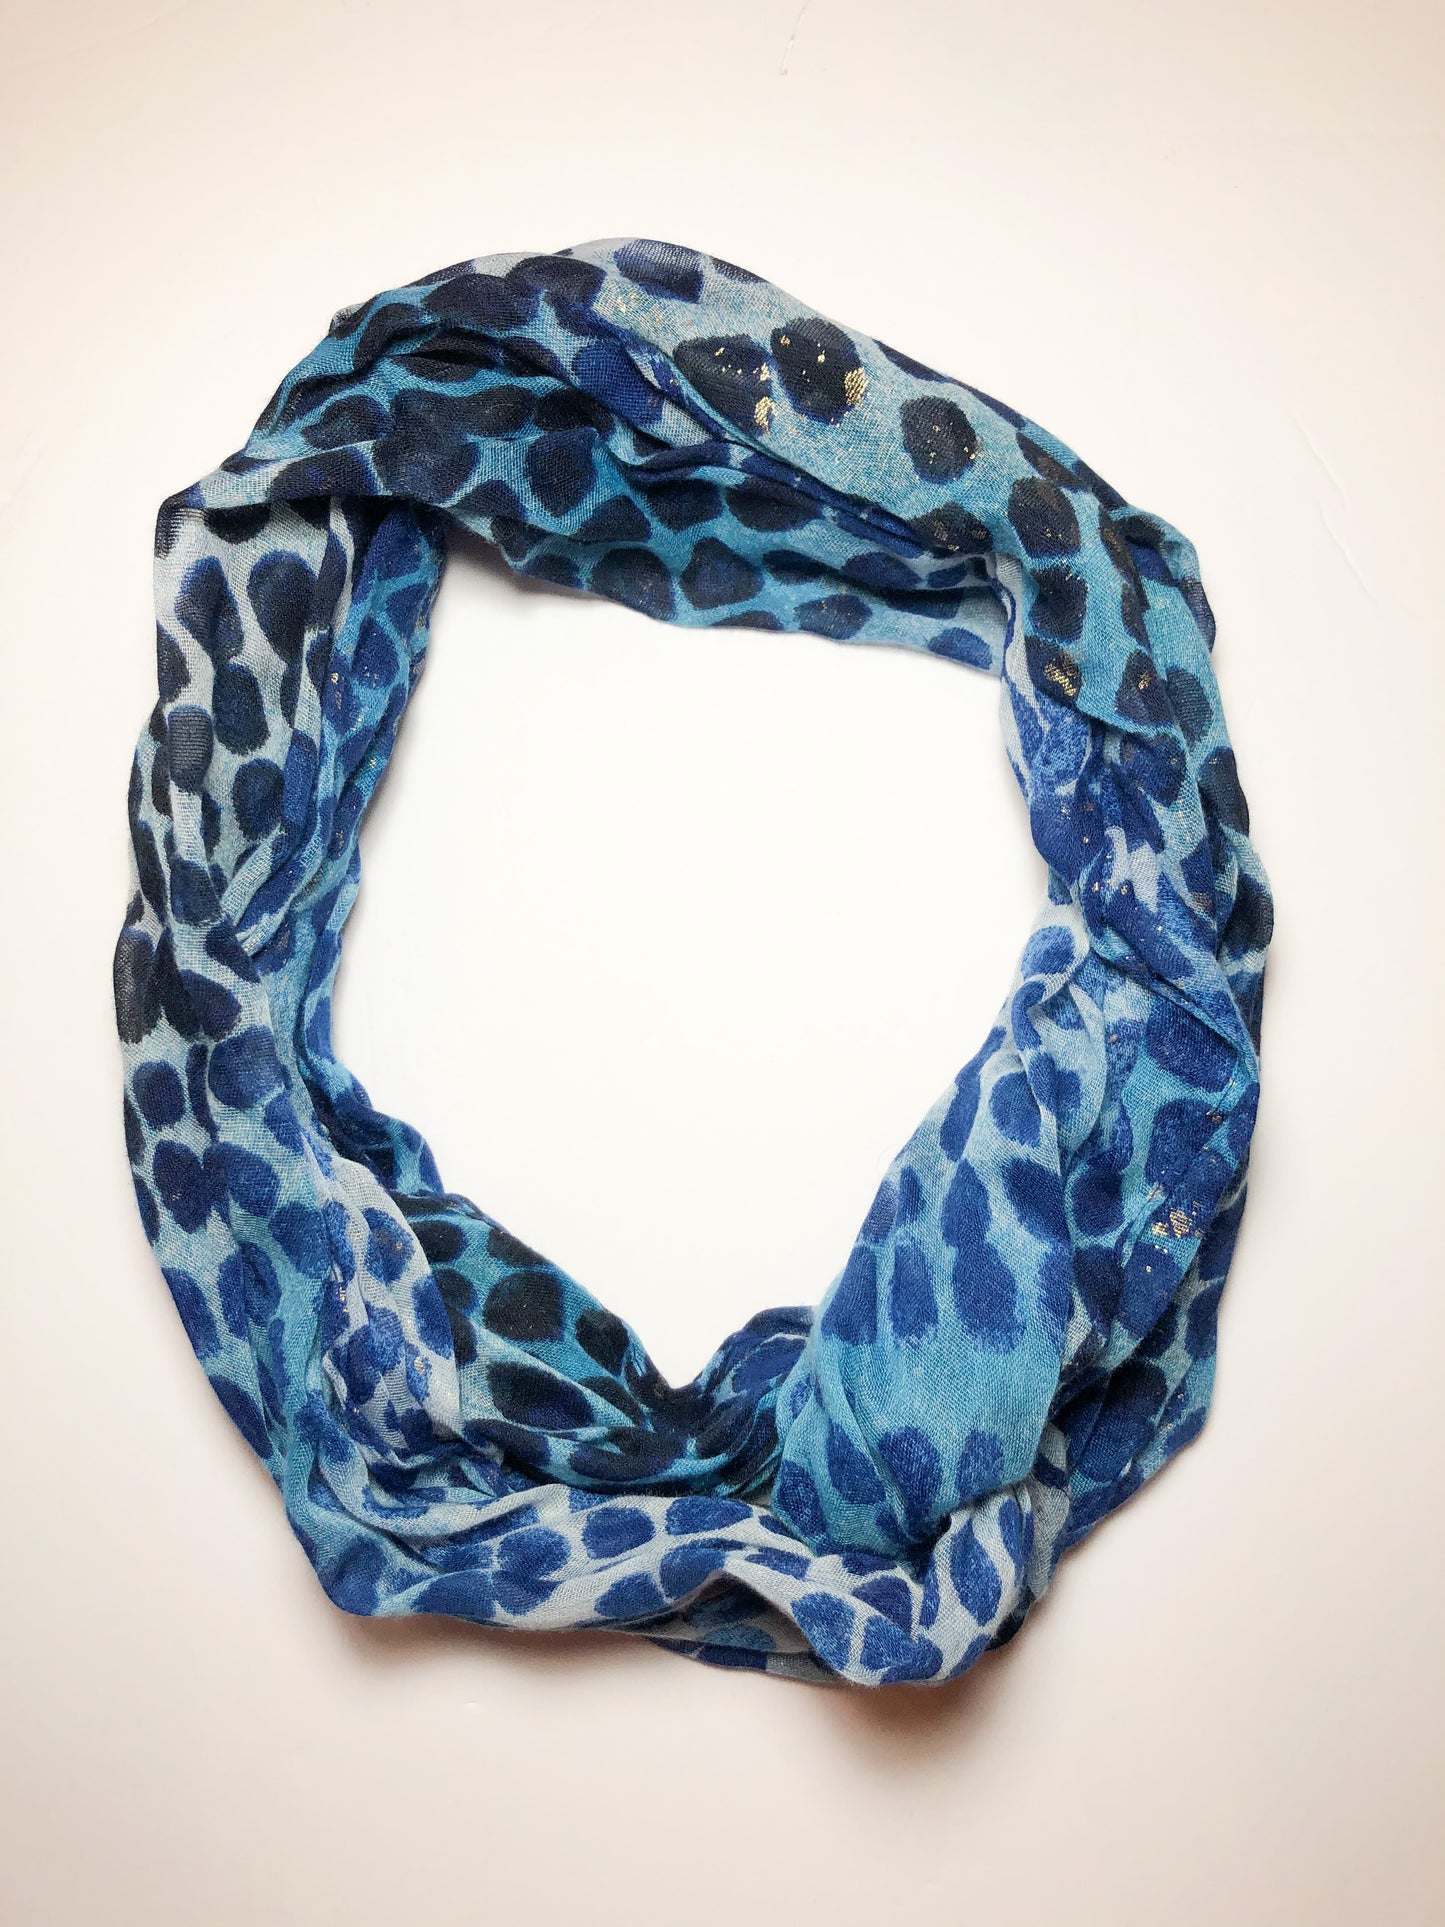 Blue Polkadot and Gold Foil Infinity Scarf